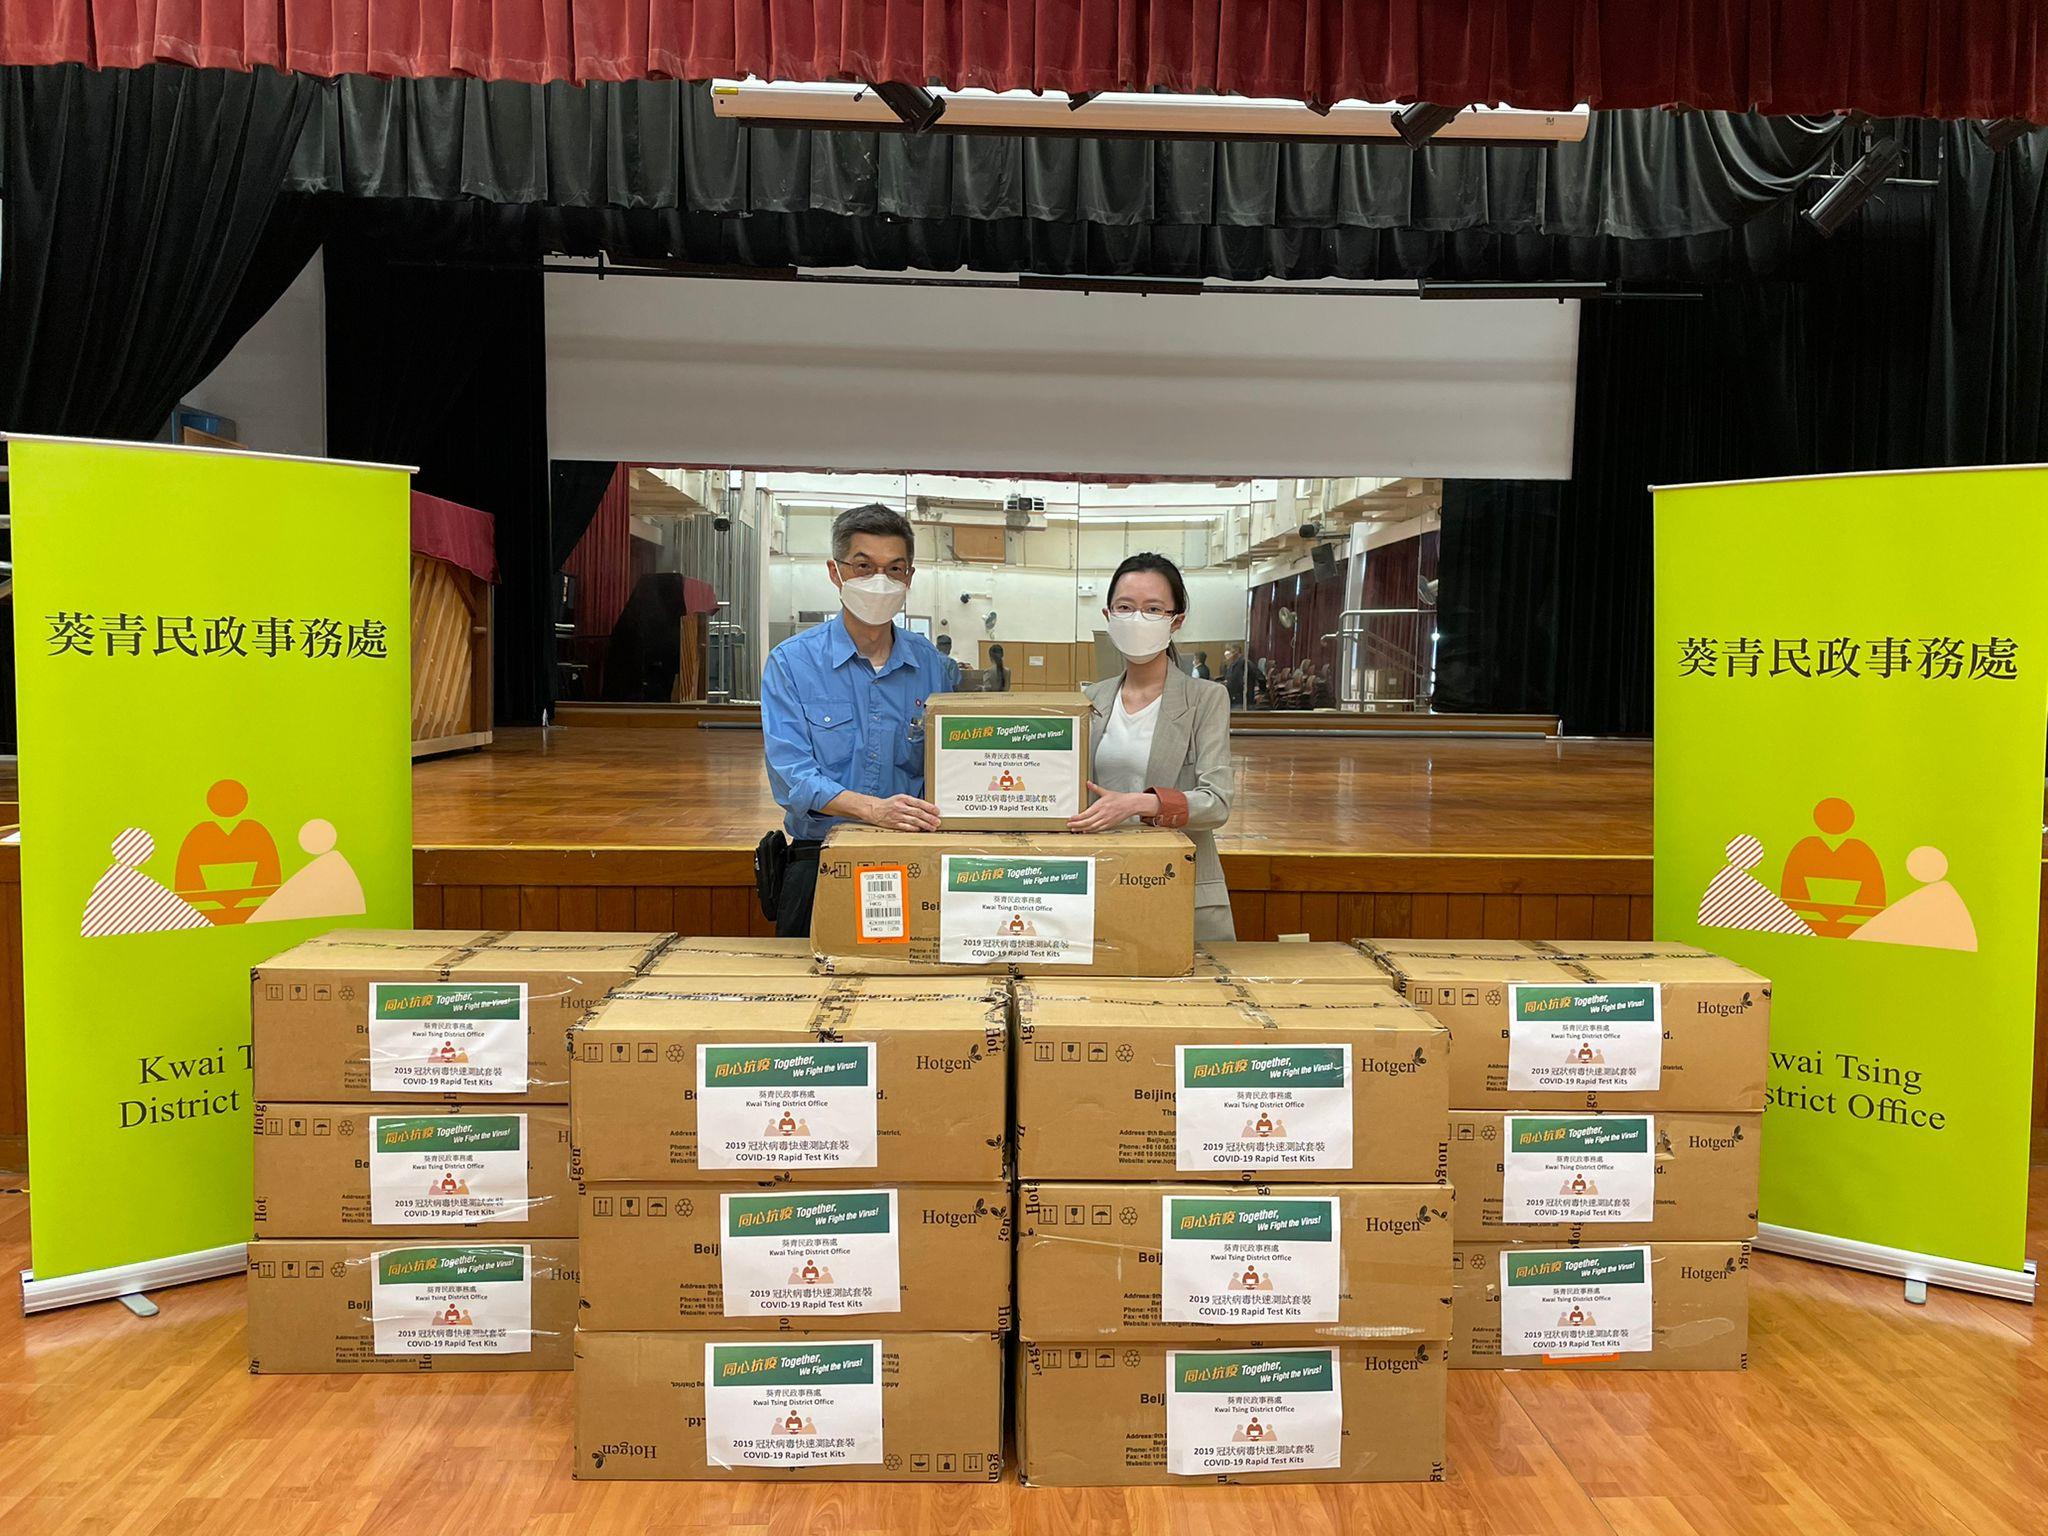 The Kwai Tsing District Office today (March 16) distributed COVID-19 rapid test kits to households, cleansing workers and property management staff living and working in Cho Yiu Chuen for voluntary testing through the Hong Kong Housing Society.